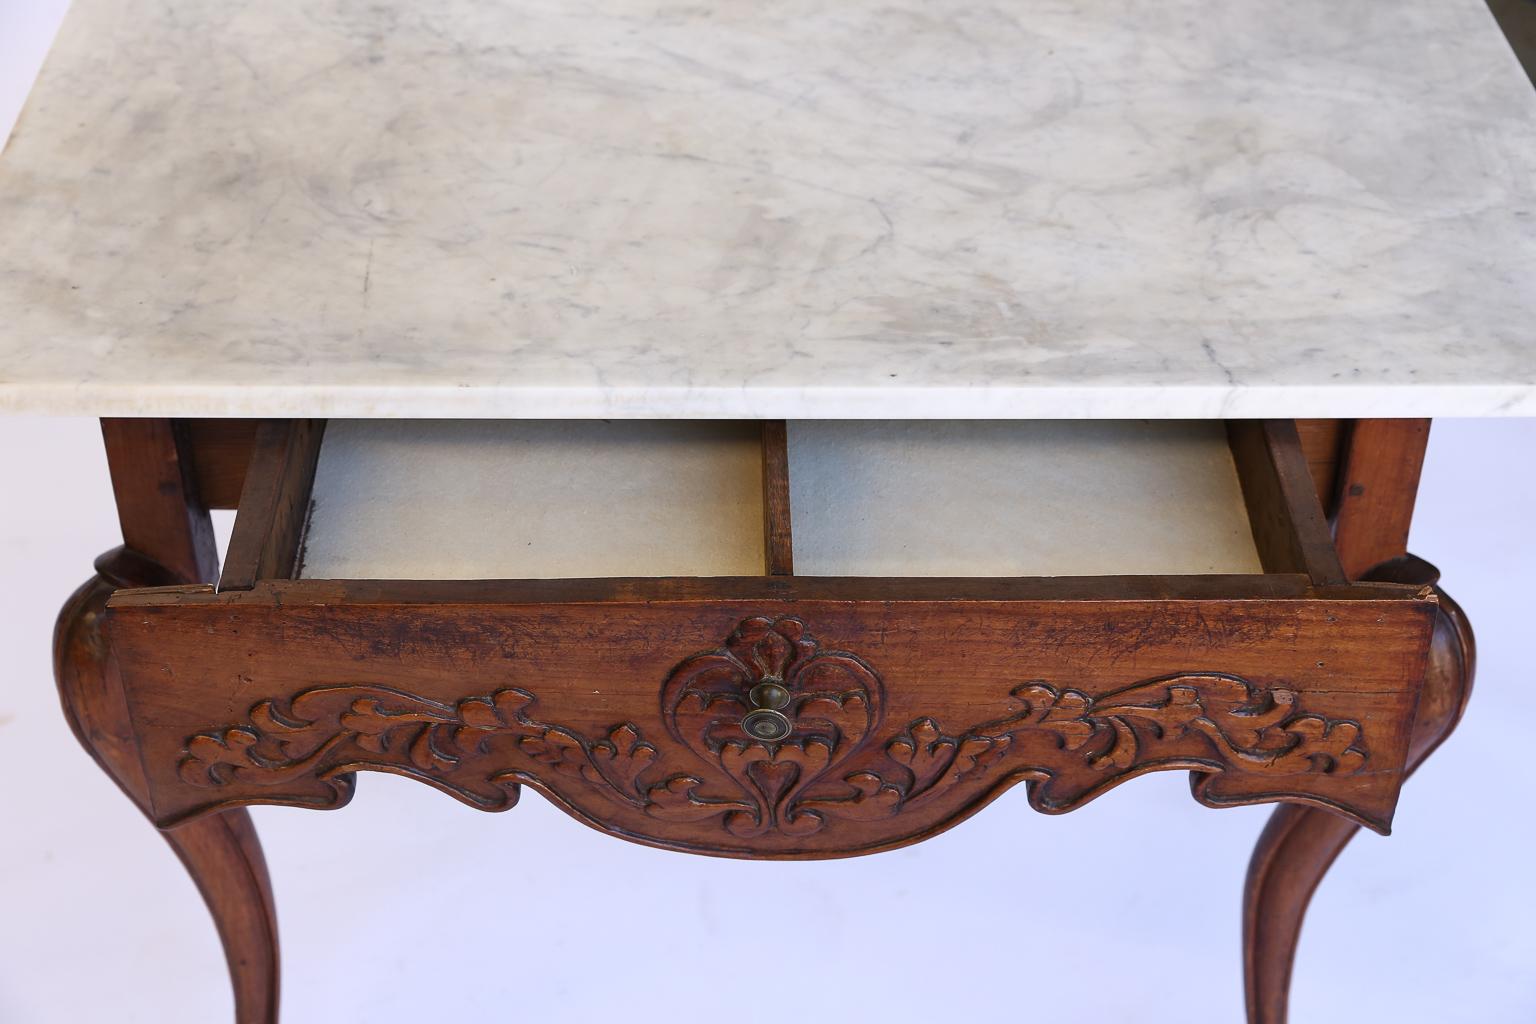 We found this charming French walnut end table in Provence. The table has a beautifully carved scalloped drawer on the front and cabriolet legs. The gorgeous wood patina on the base of the piece is one that can only come with age. The top of the